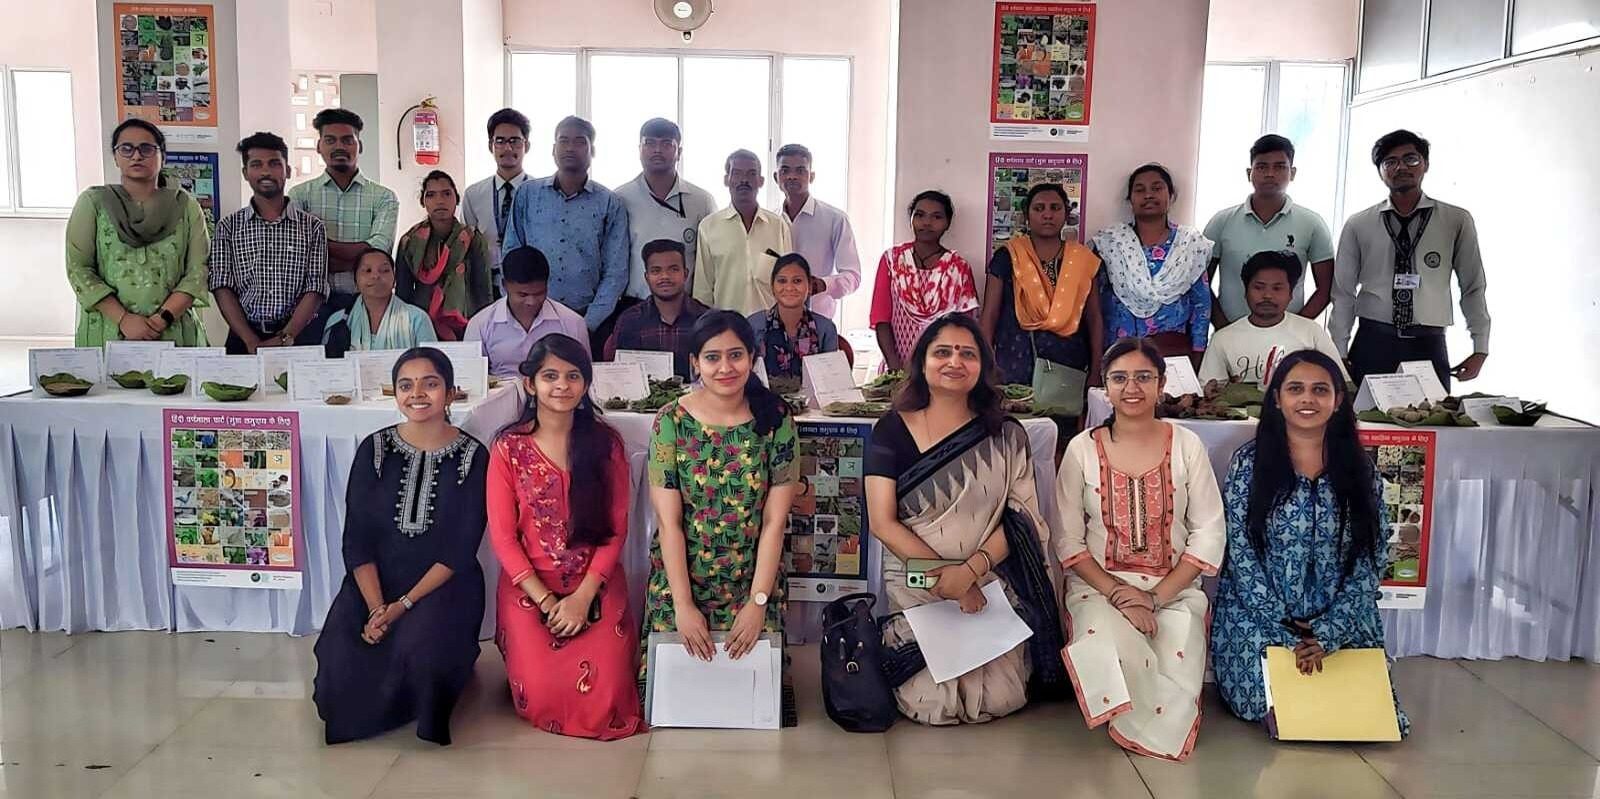 Group of researchers in India